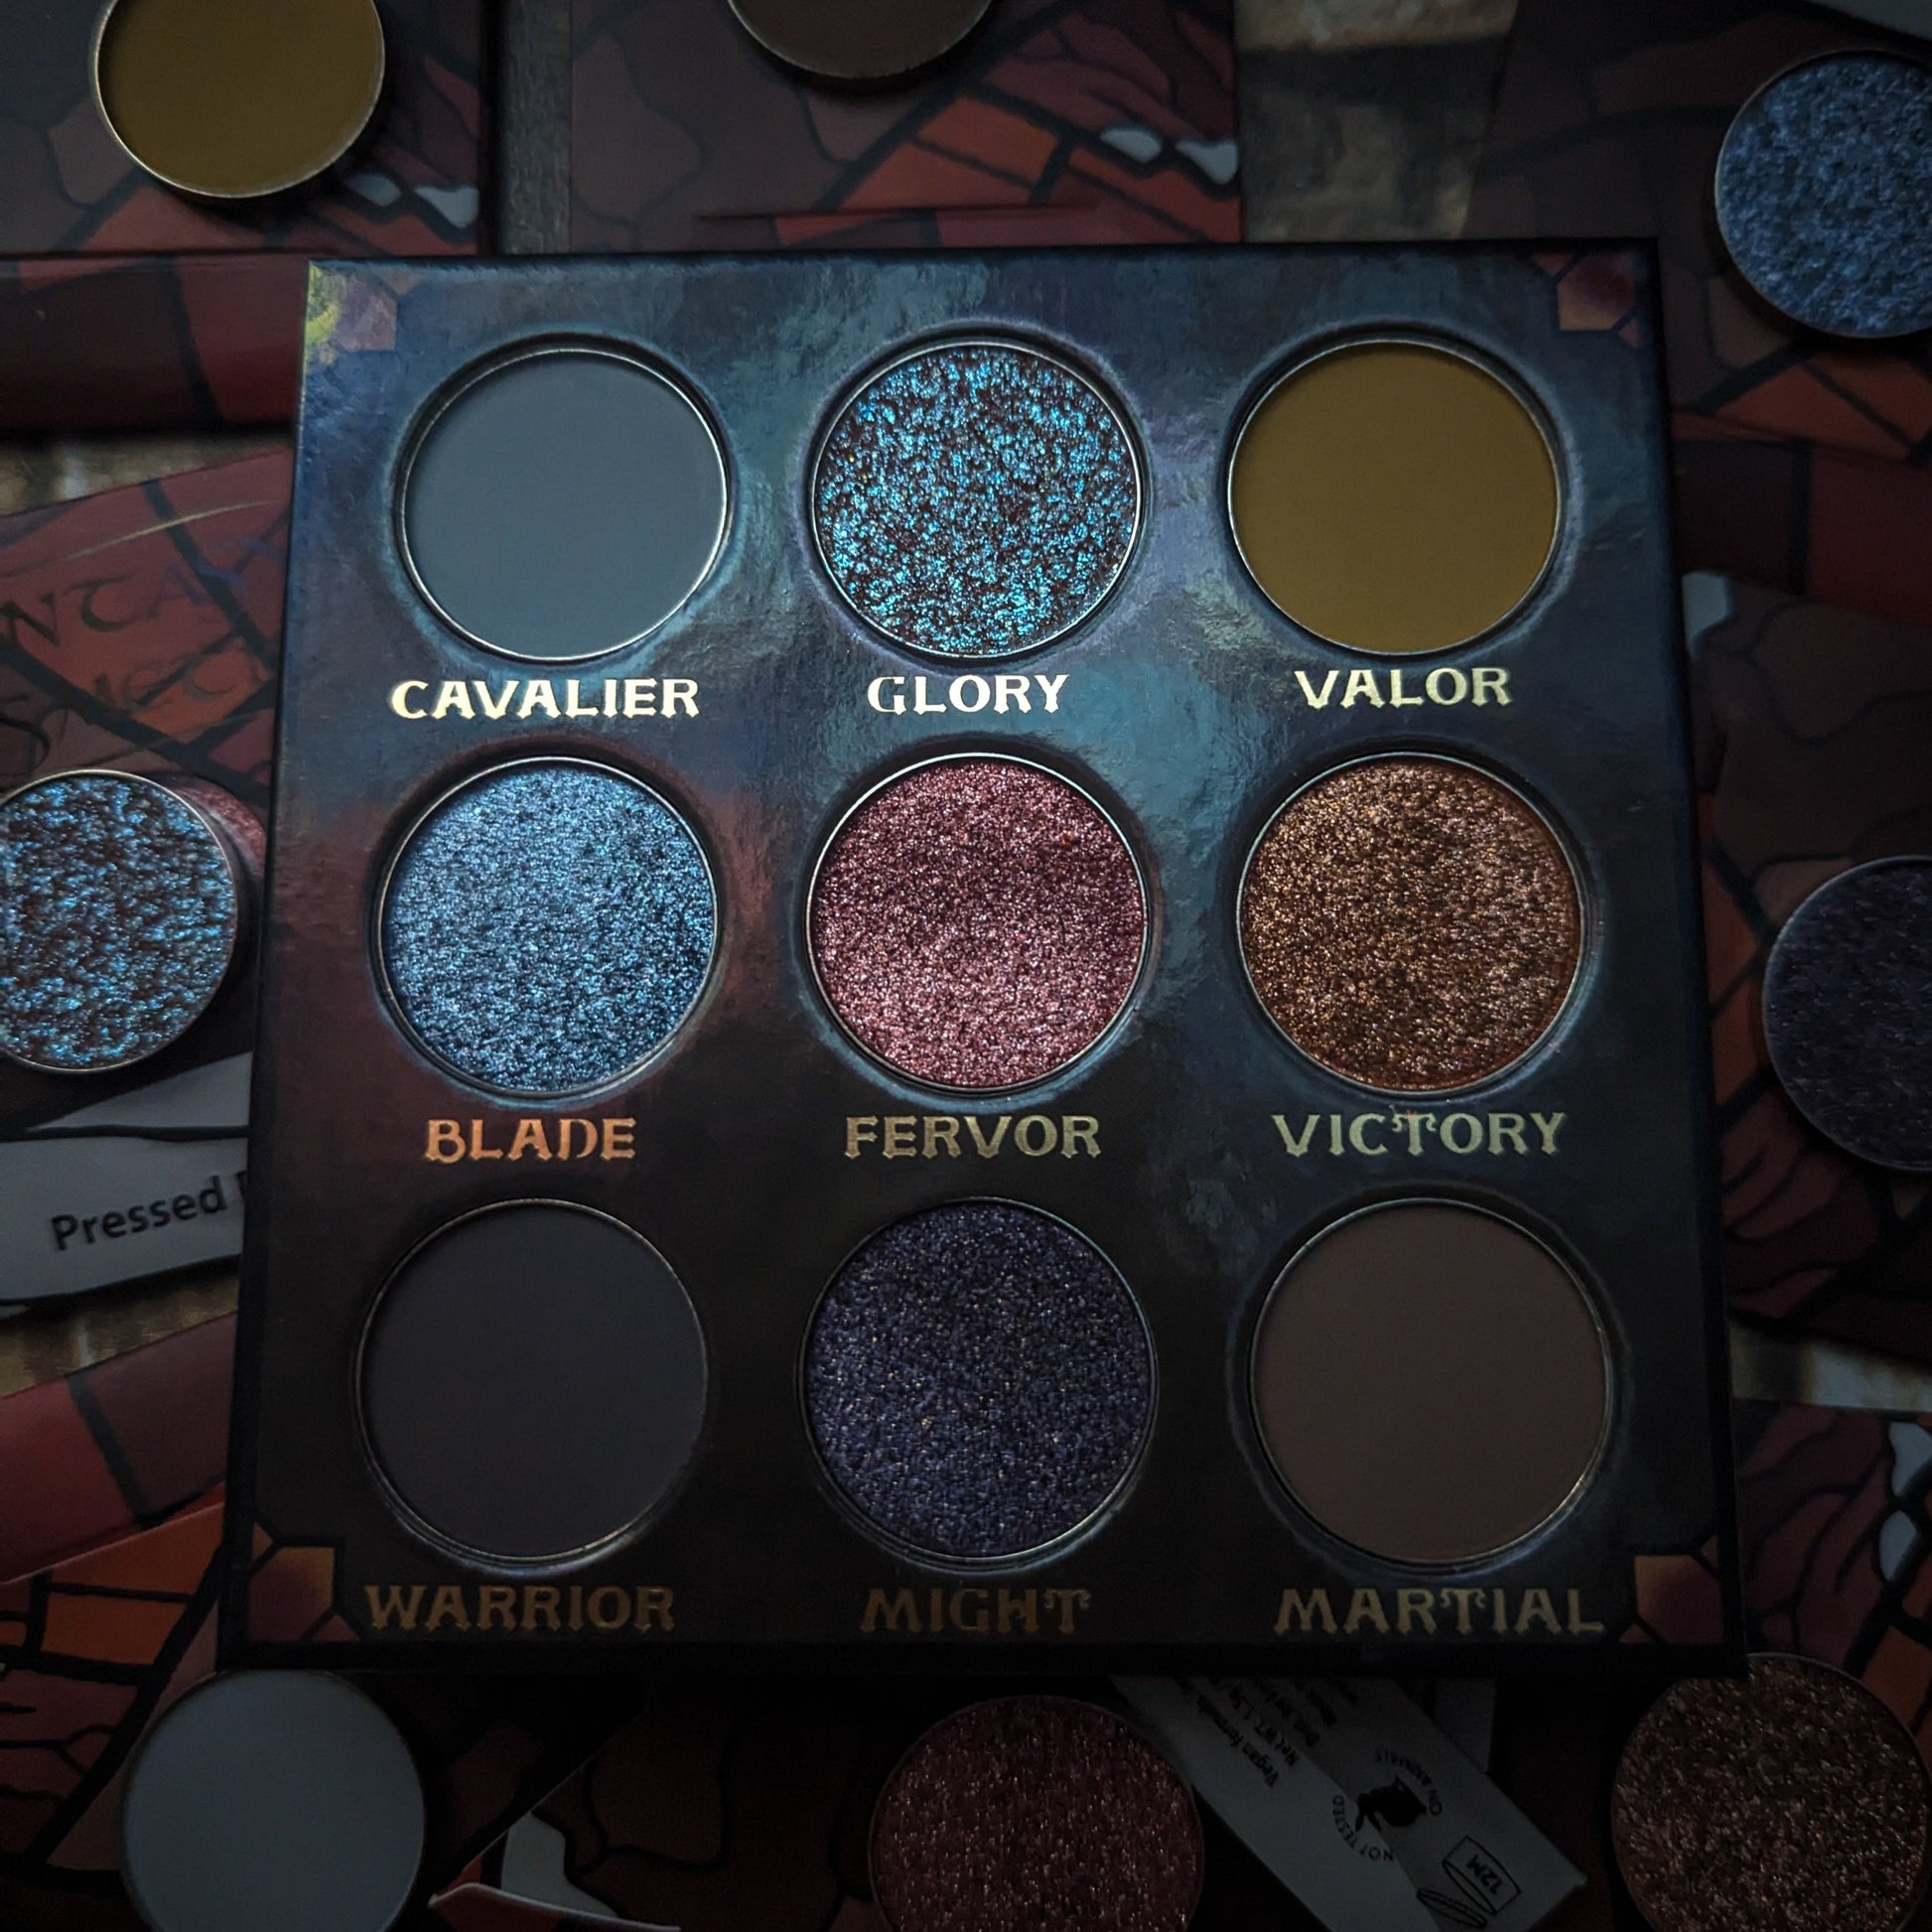 Fighter eyeshadow palette by Fantasy Cosmetica opened